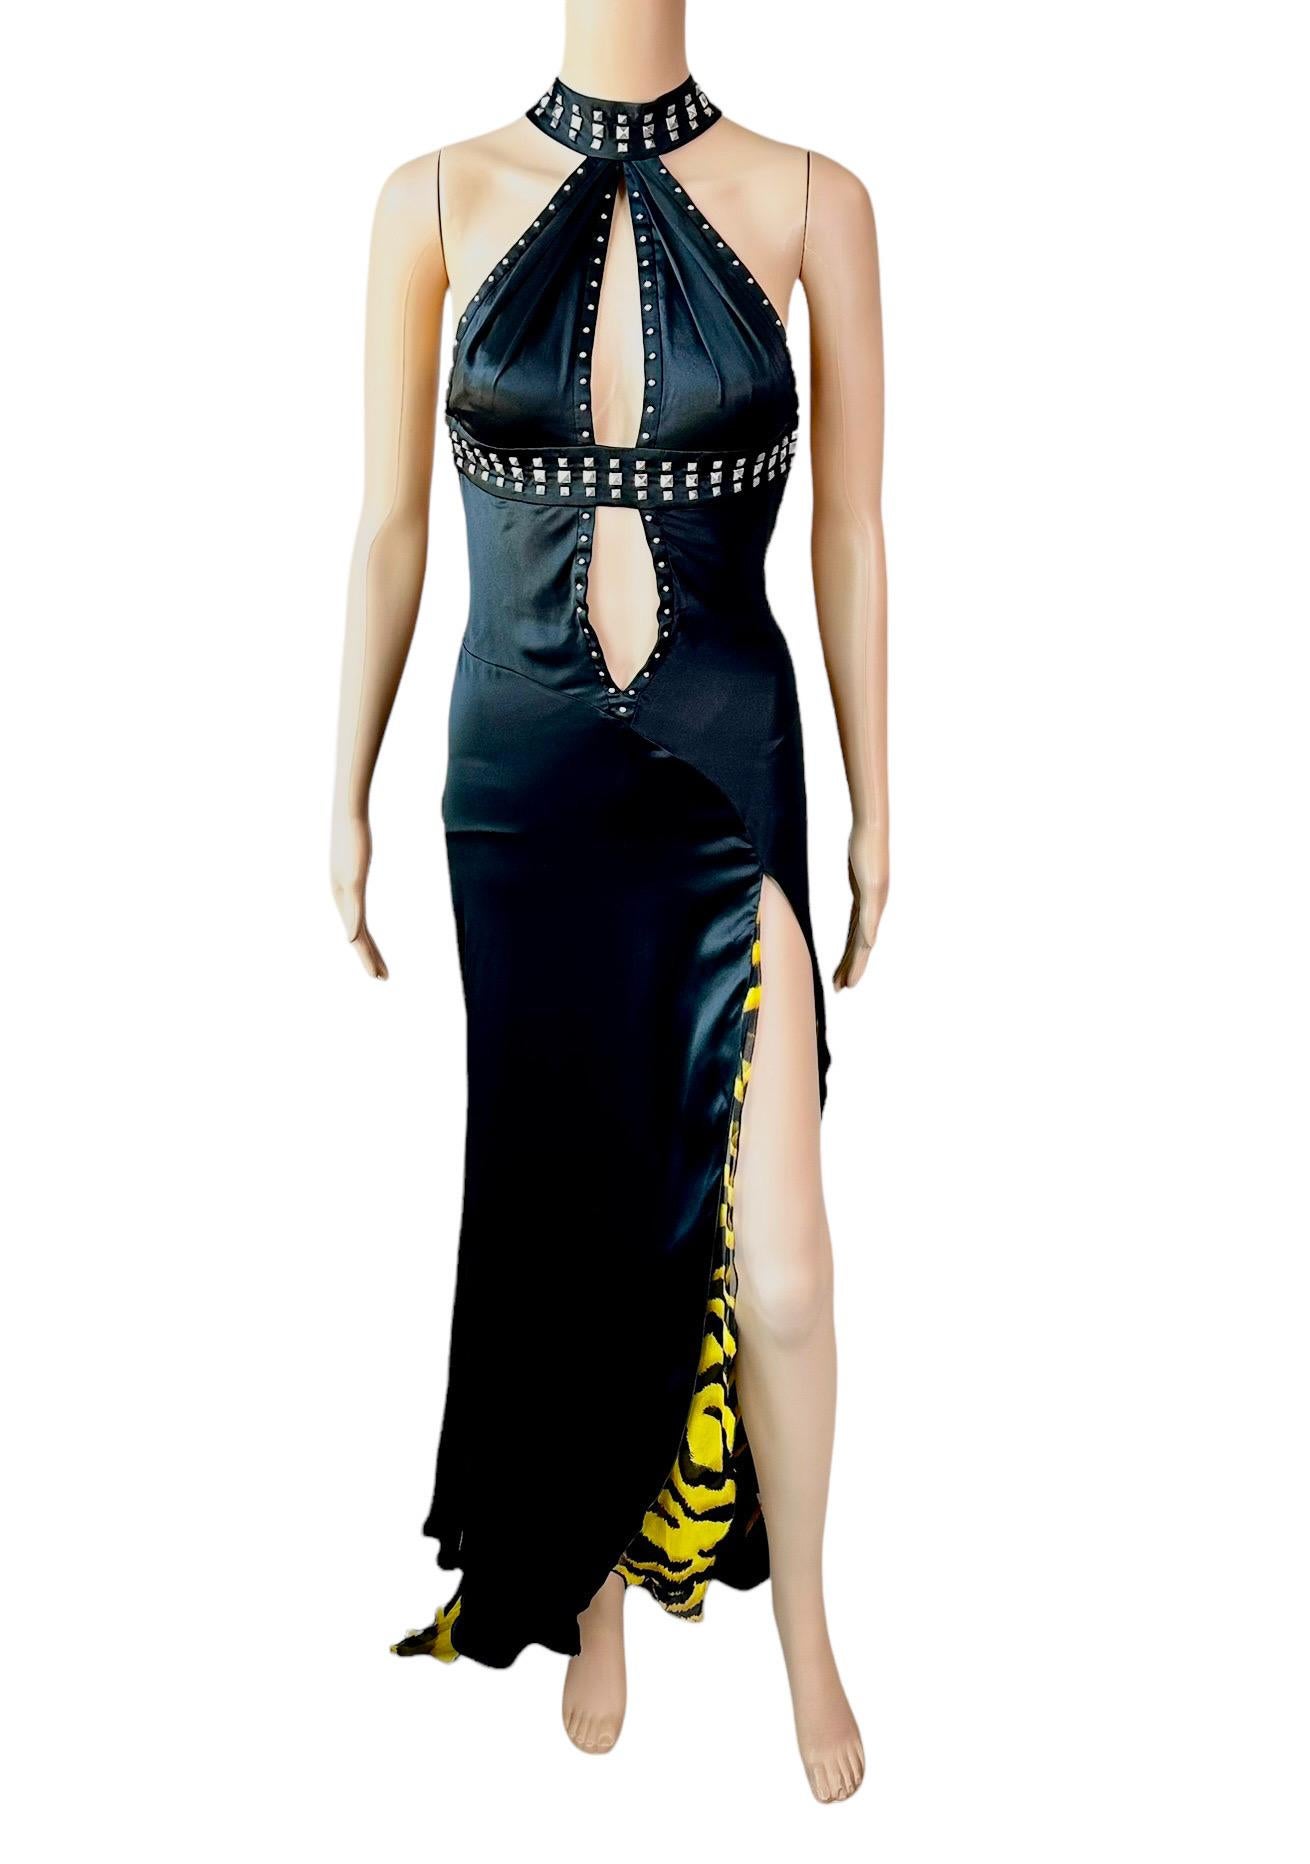 Versace F/W 2004 Runway Studded Plunging Keyhole Neckline Evening Dress Gown For Sale 2